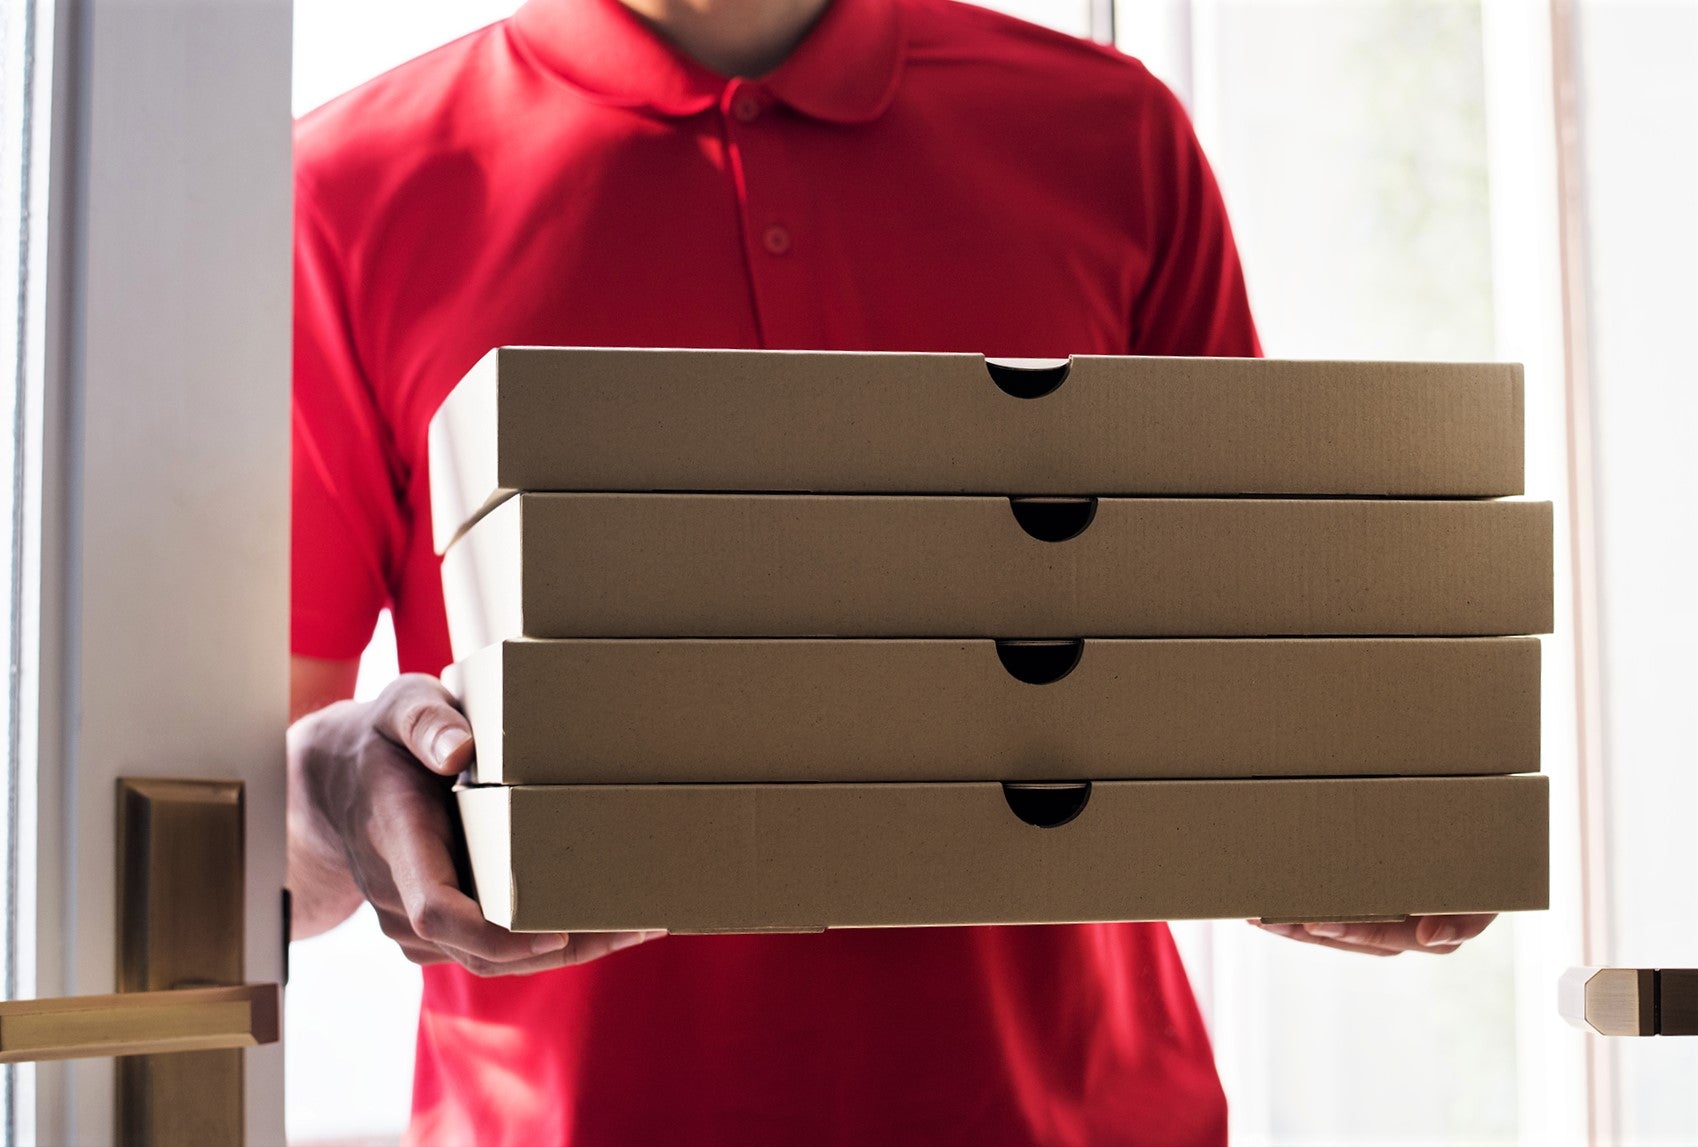 pizza delivery man in red shirt carrying stack of hot fresh pizzas